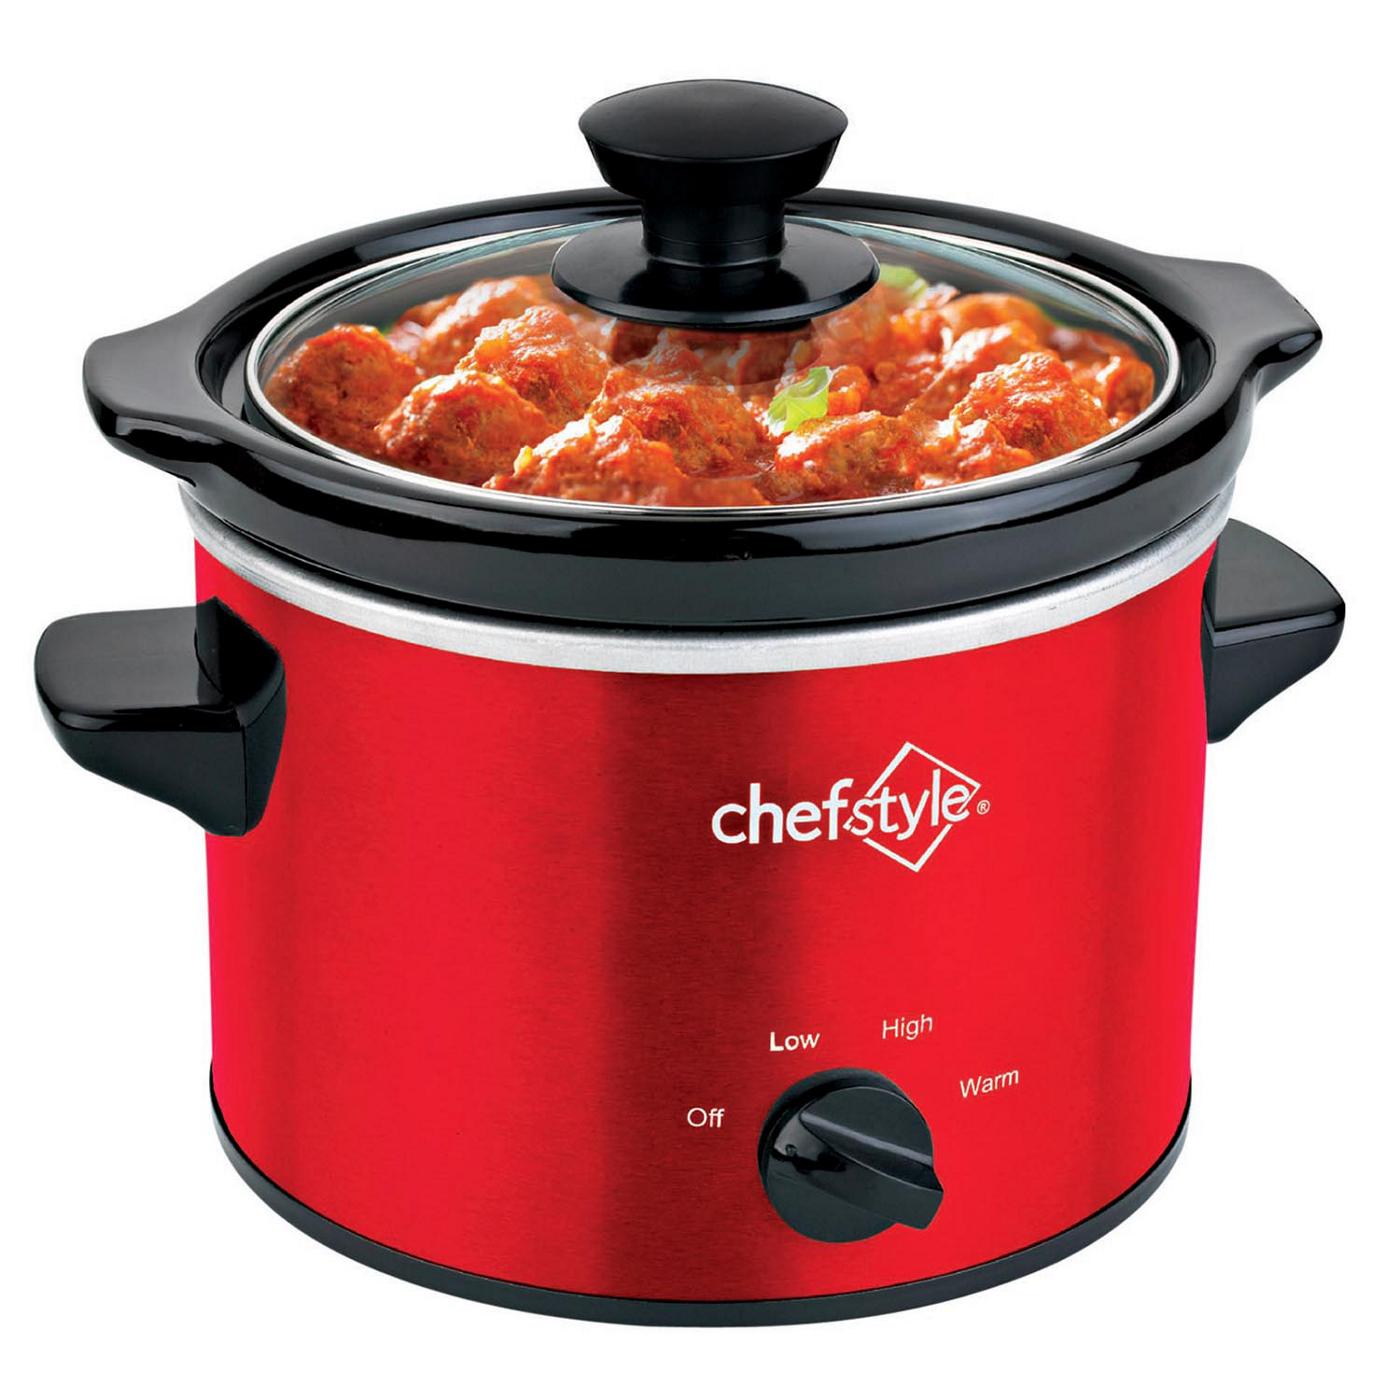 From humble to high tech, a slow cooker history - CNET